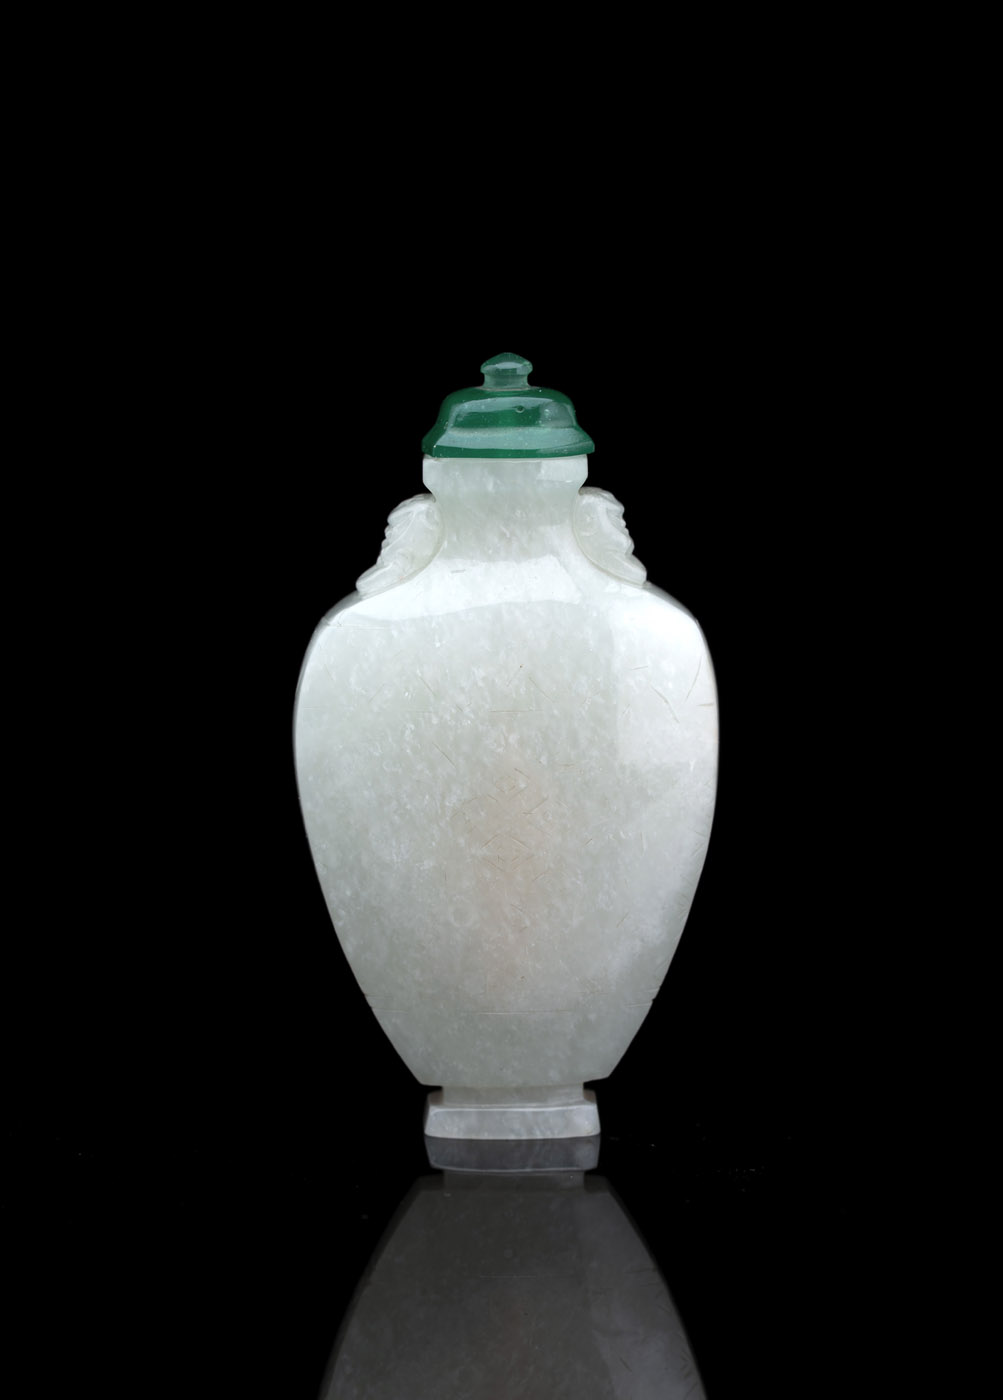 <b>A WELL CARVED LIGHT GREEN JADE SNUFFBOTTLE WITH A GREEN GLASS STOPPER</b>